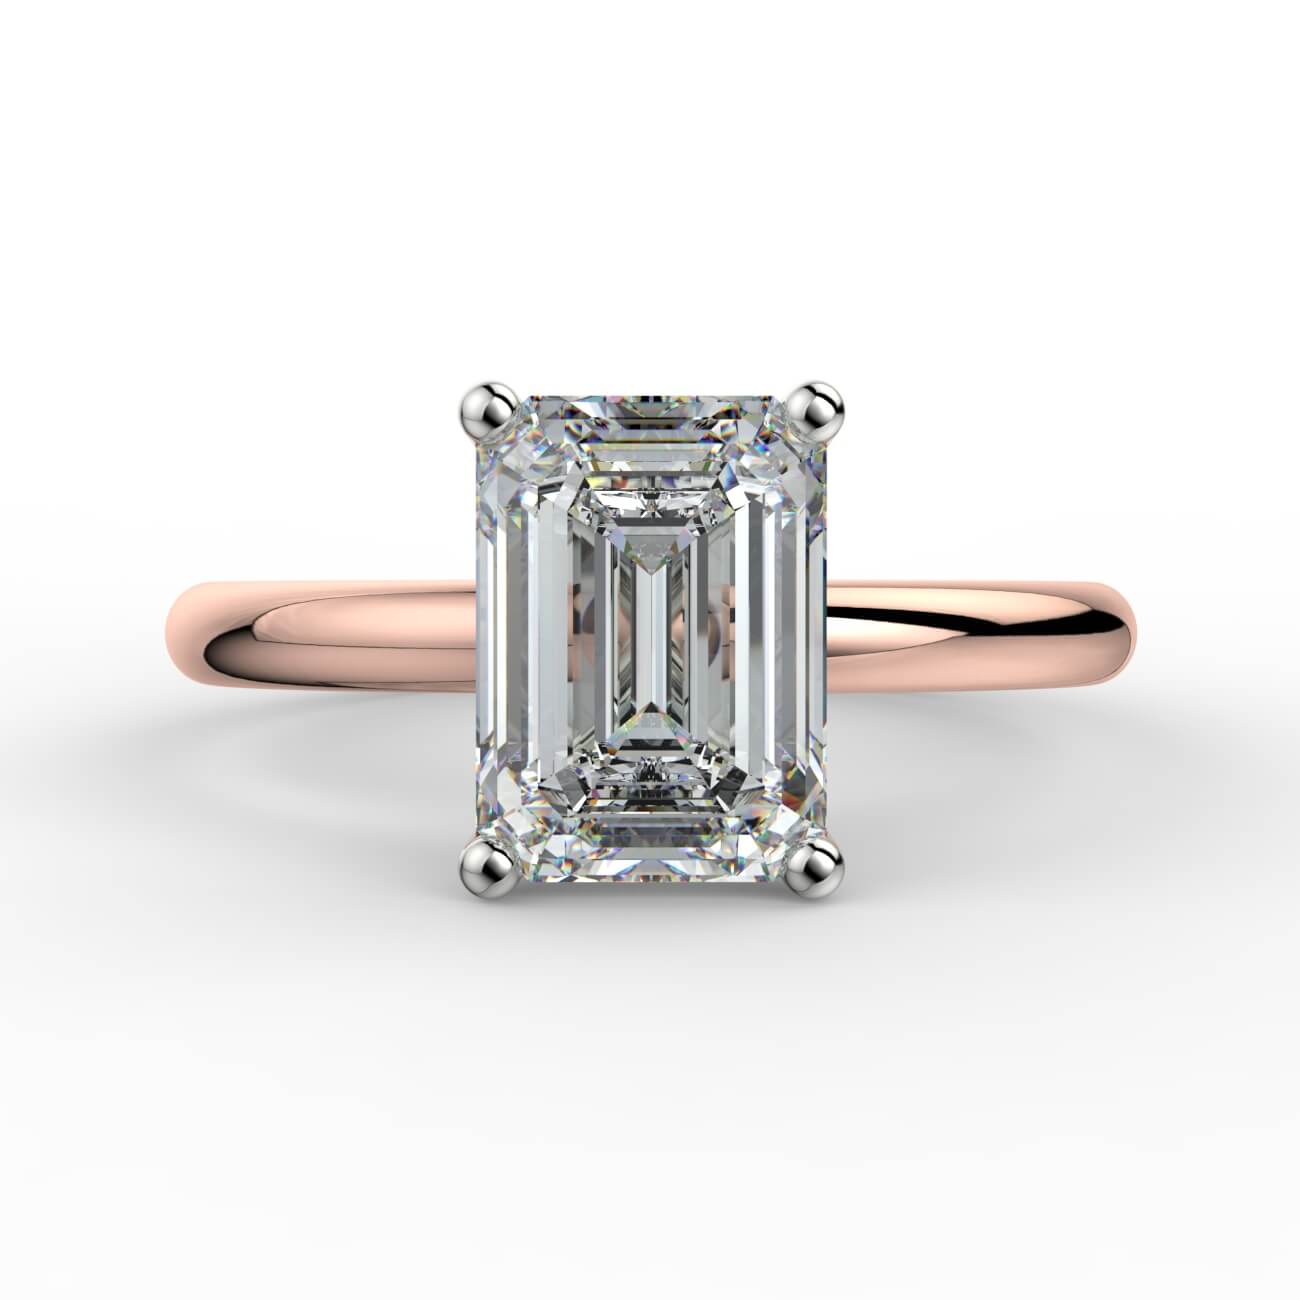 Comfort fit 4 claw emerald cut solitaire diamond ring in rose and white gold – Australian Diamond Network